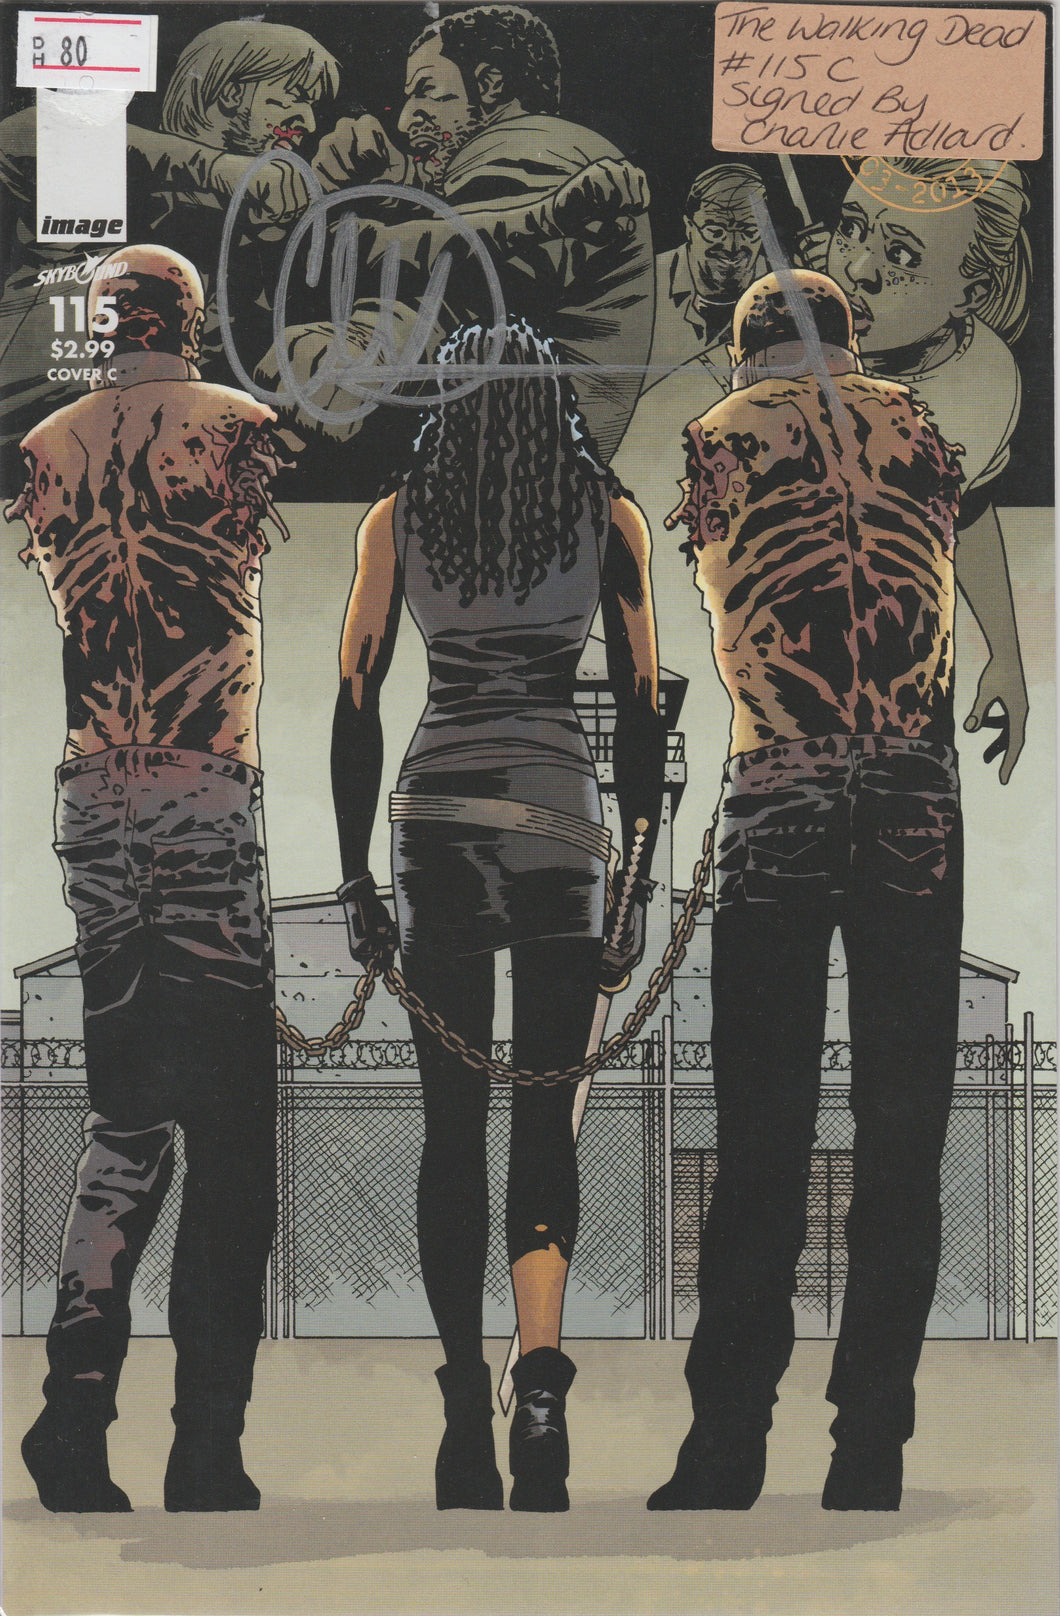 The Walking Dead 115 cover C signed by Charlie Adlard